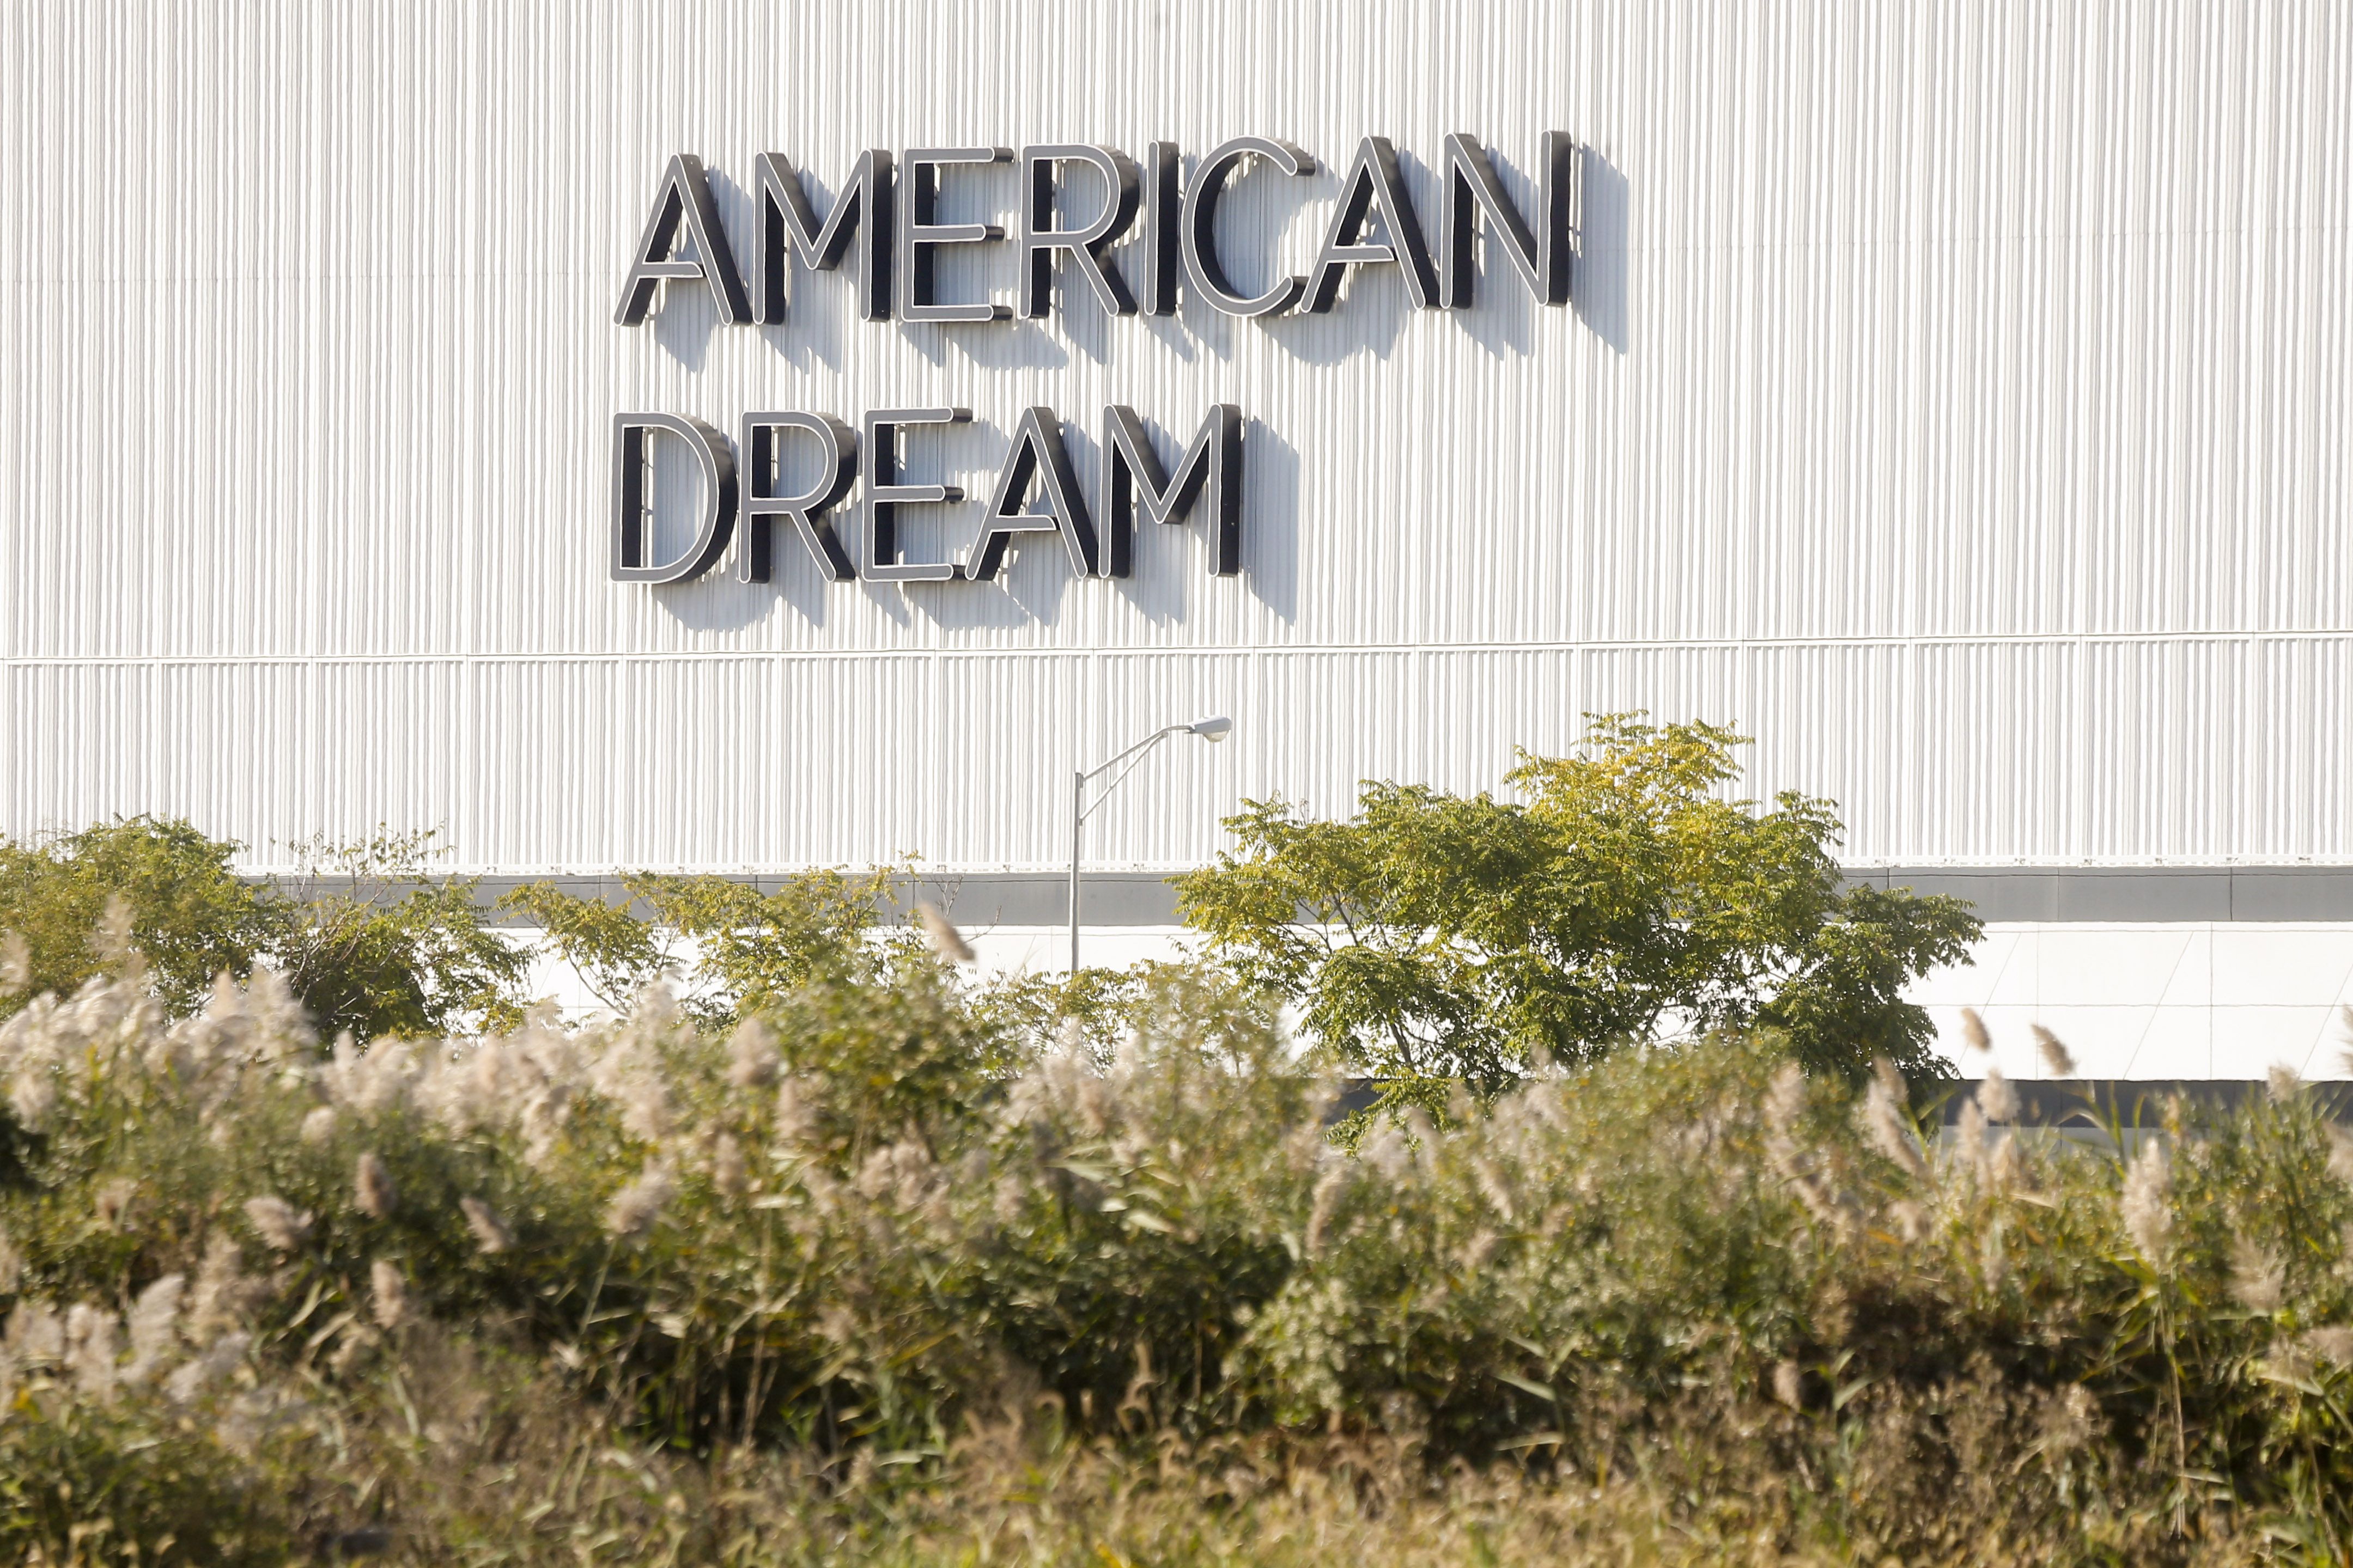 Walking American Dream Mall : Second Largest Mall in America 